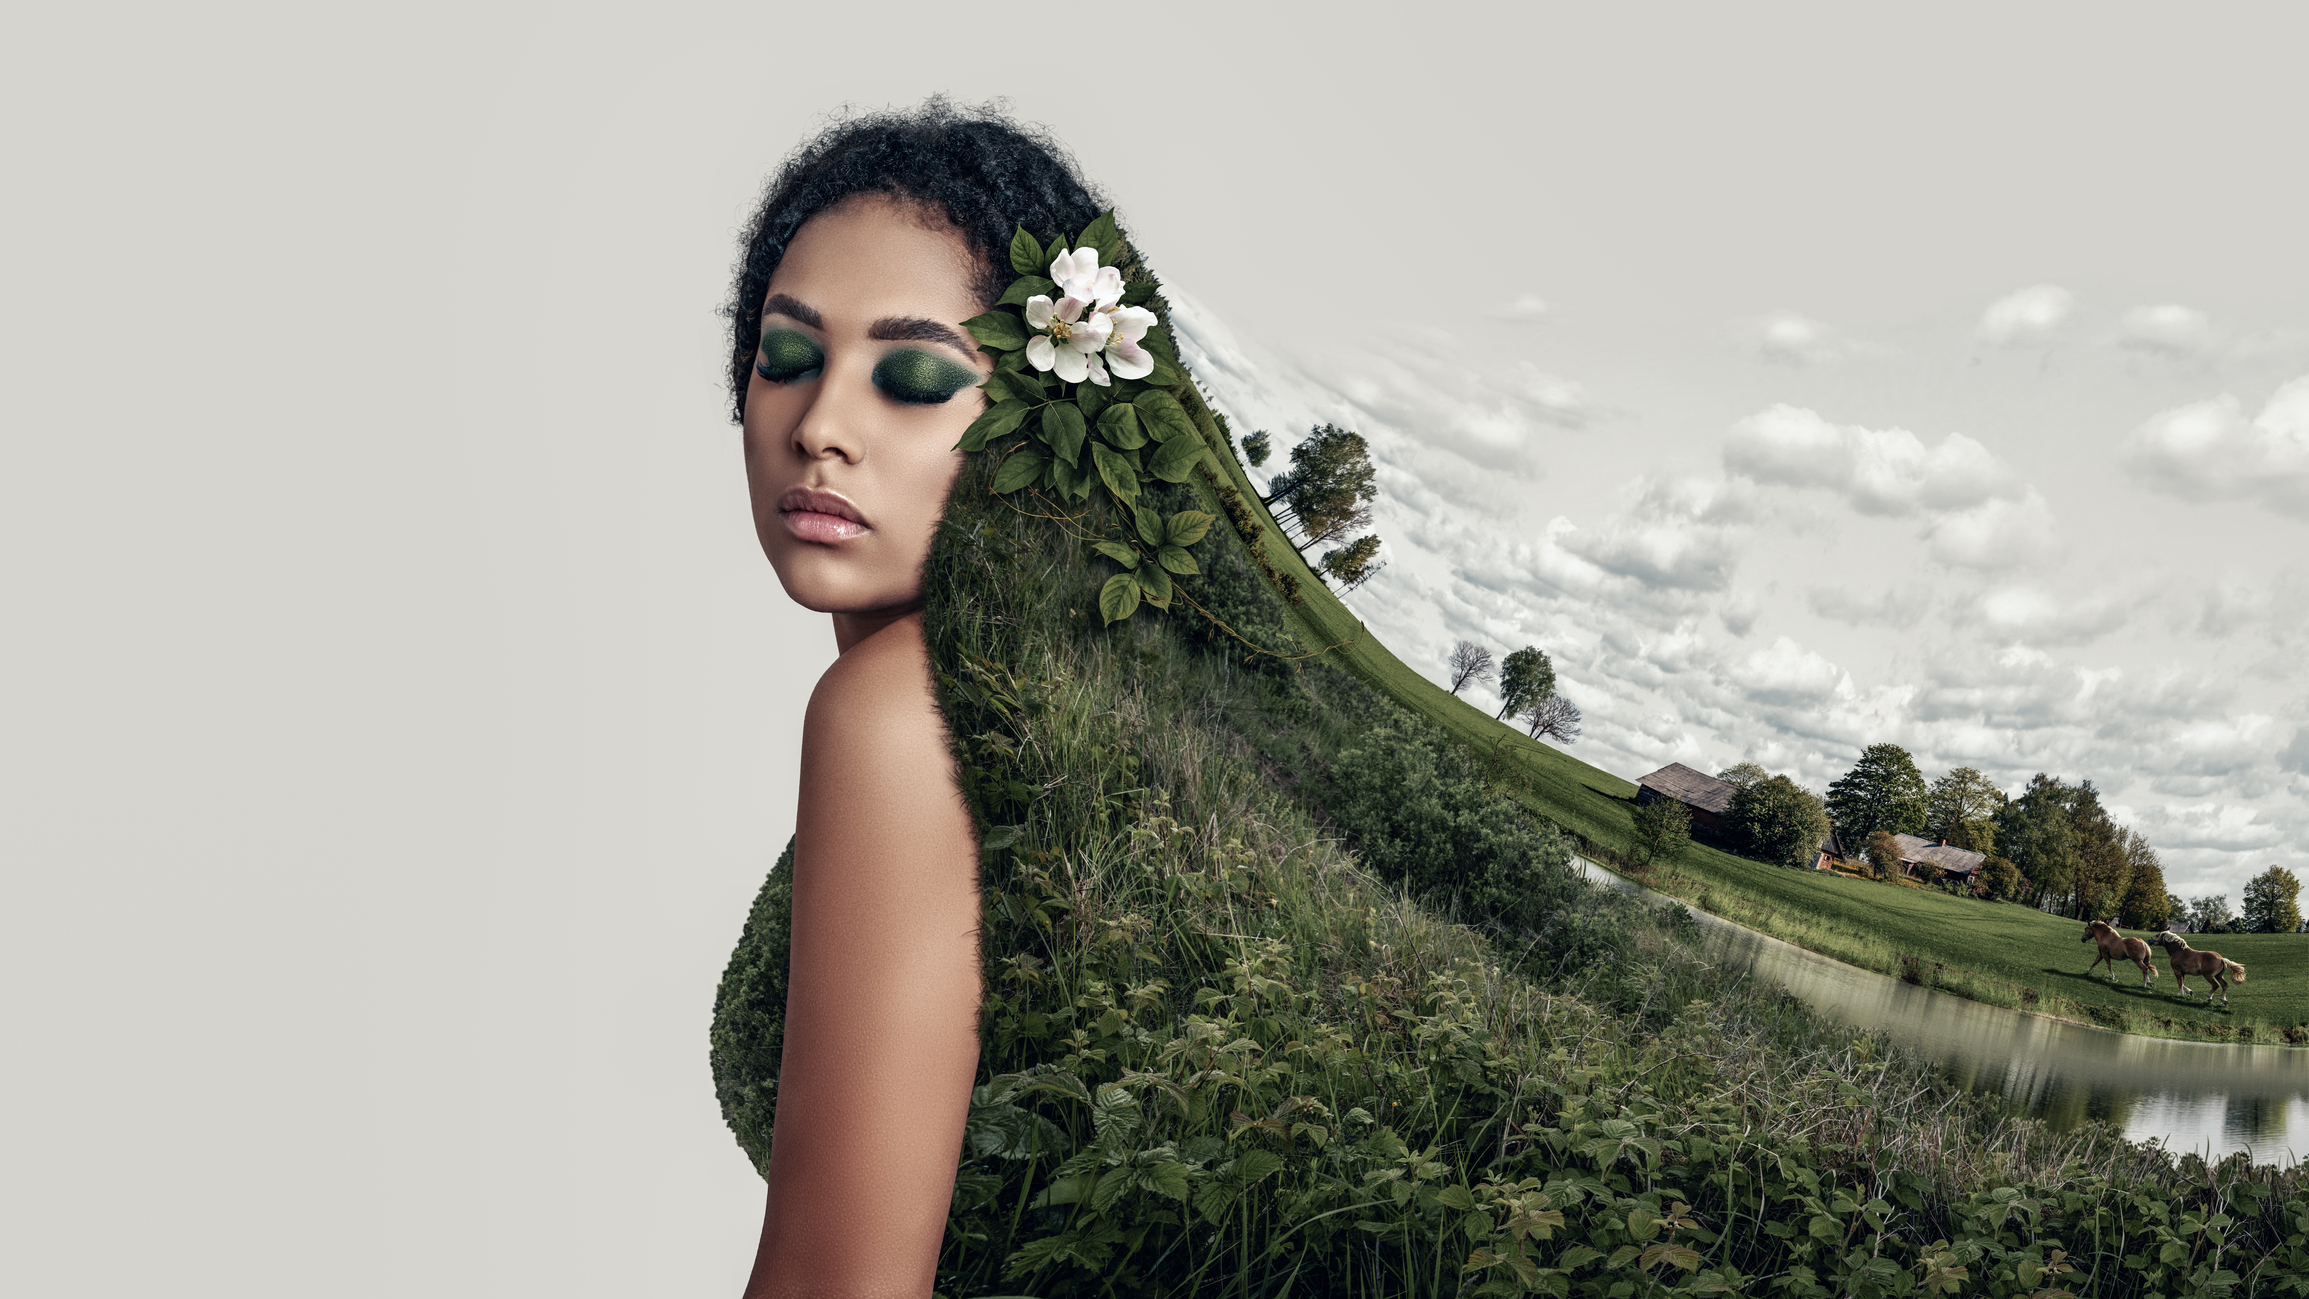 AI generated artwork of a woman in a dress made of grass merged with an image of a grassy field.